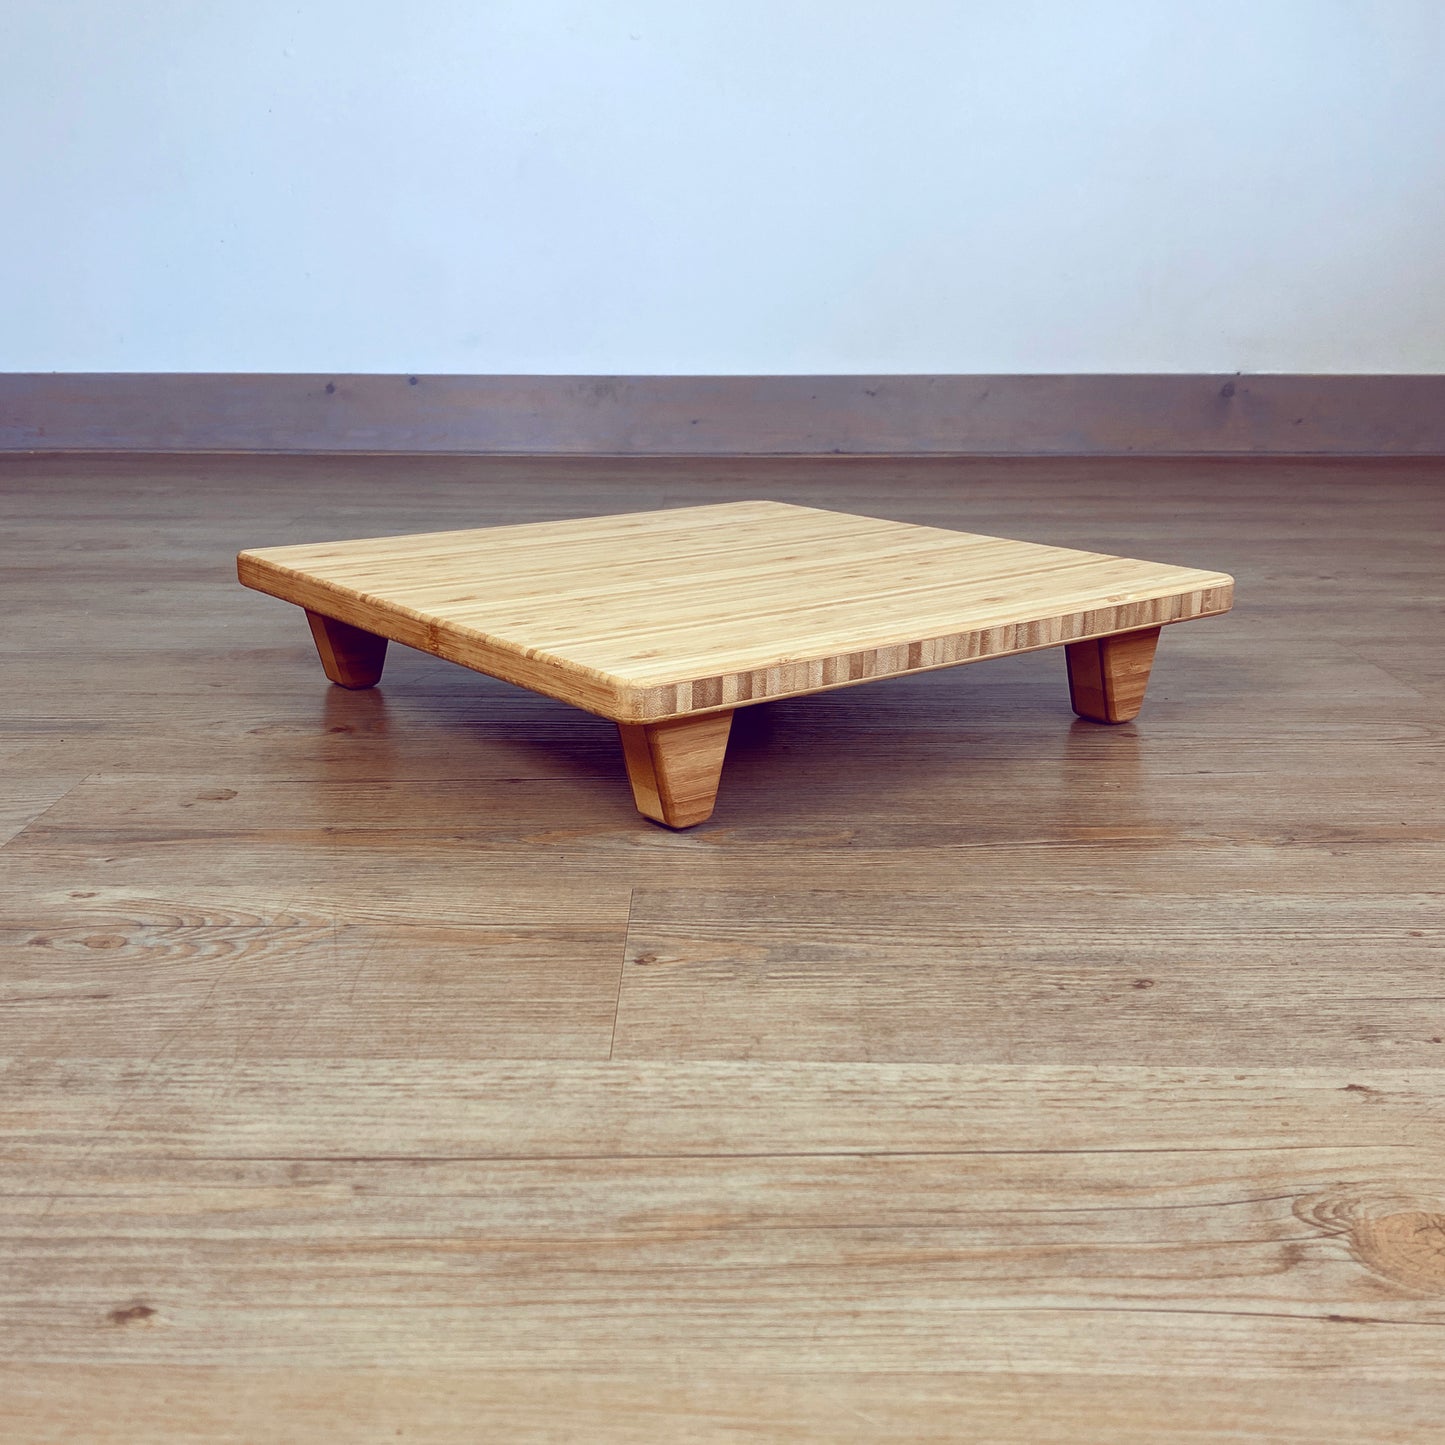 Floor Chair - Natural Bamboo